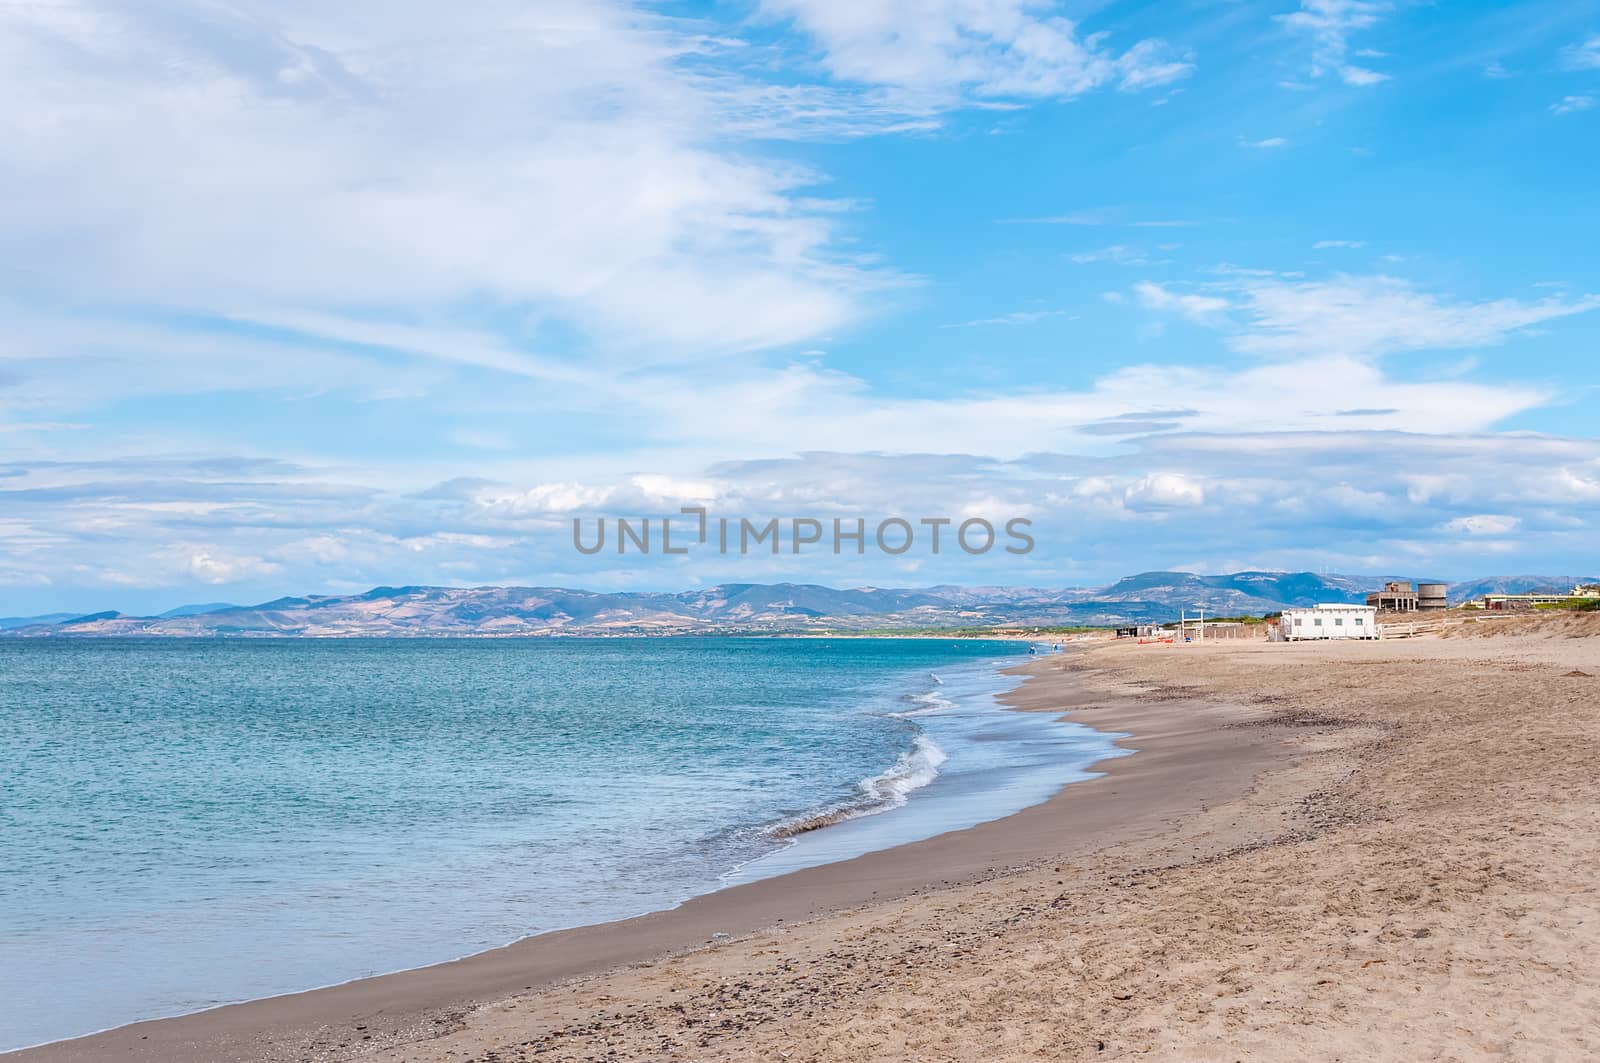 Landscape of the beach in a cloudy day of autumn in Platamona - Sardinia